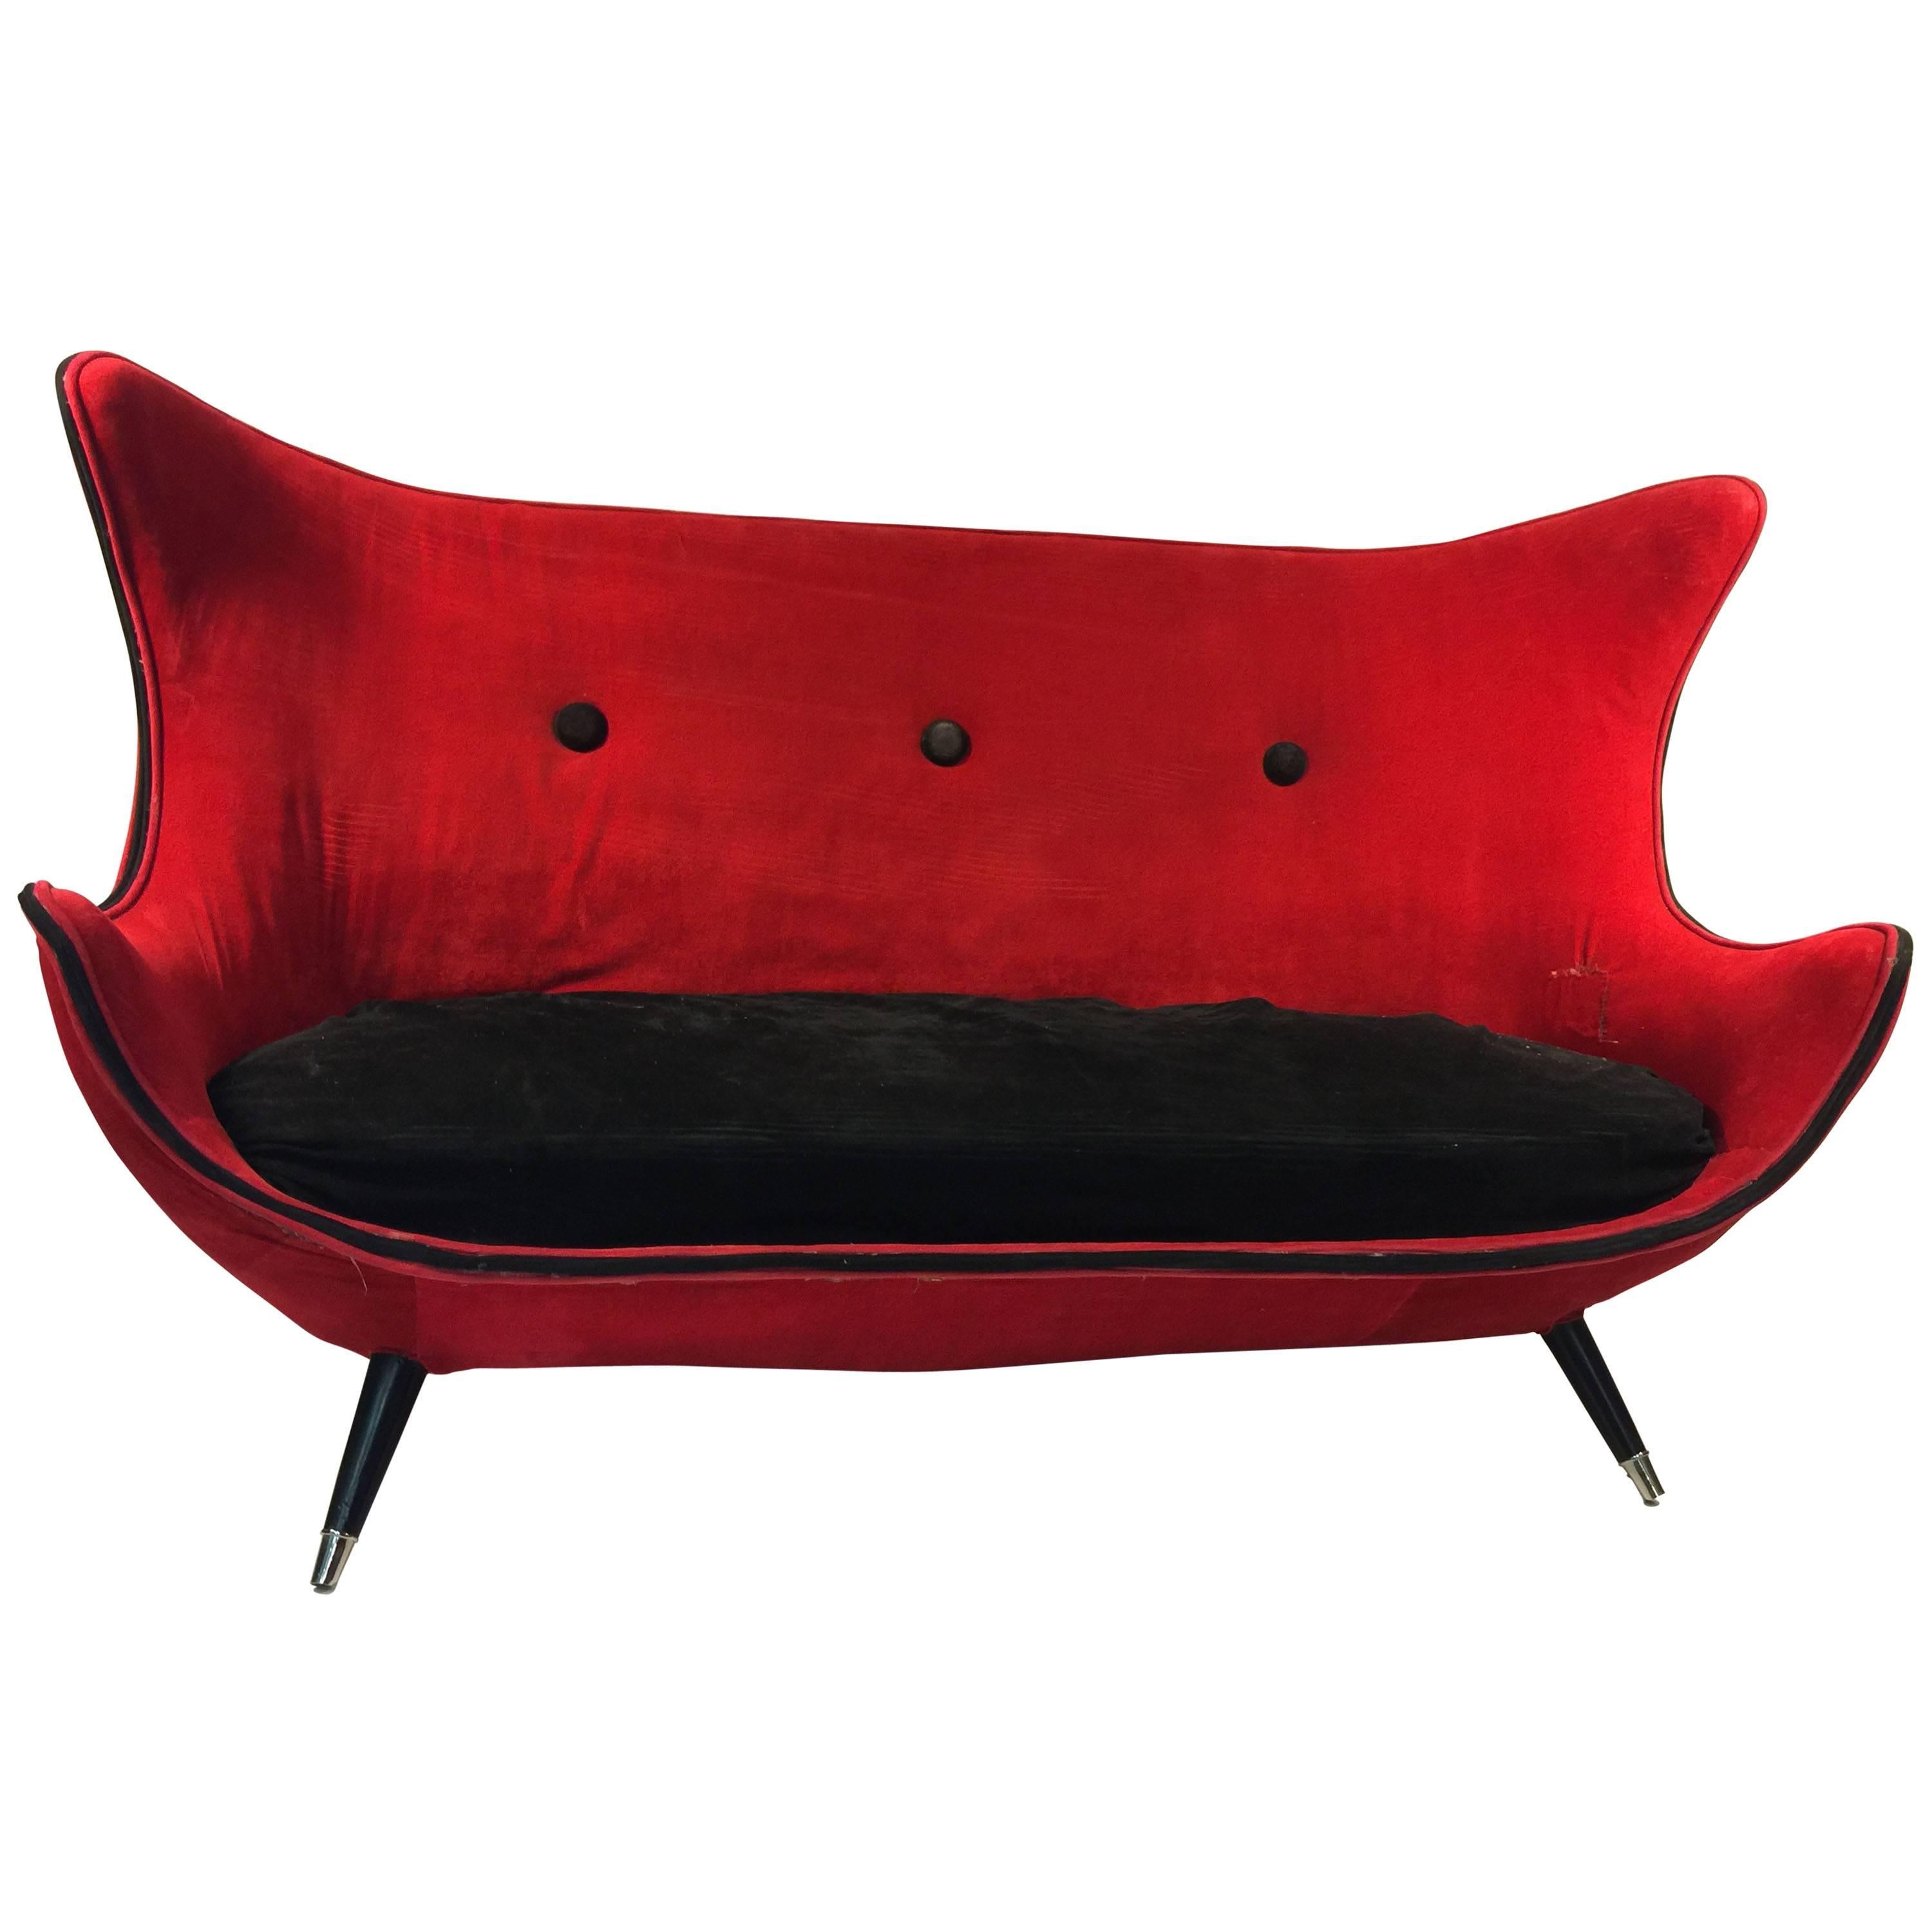 Exceptional Modernist Red/Black Settee Attributed to Jean Royere For Sale